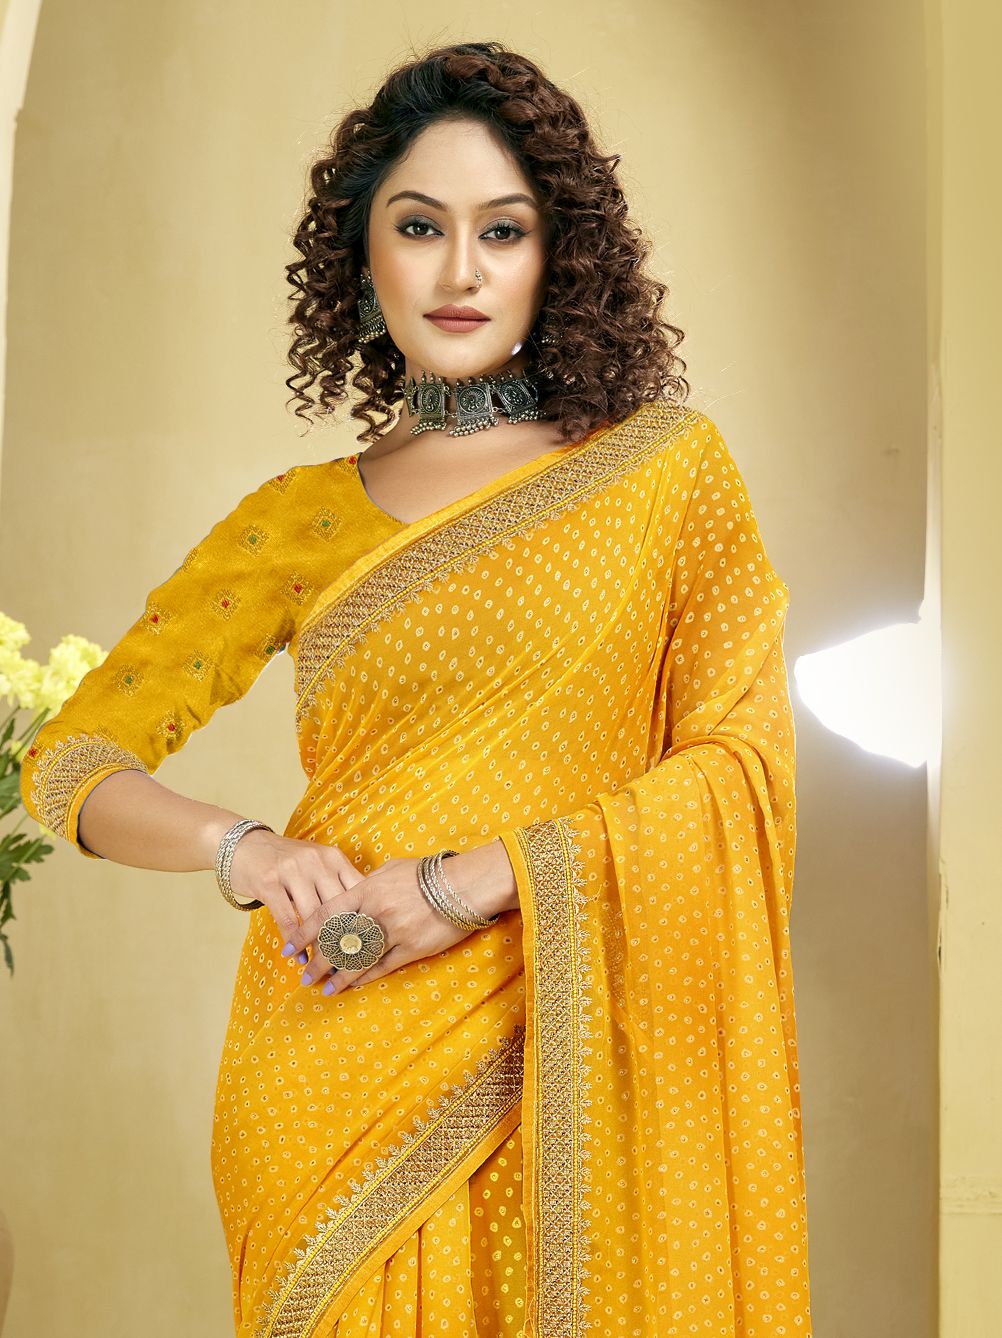 Elegant Yellow Georgette Silk Saree: Perfect for Party & Wedding Wear